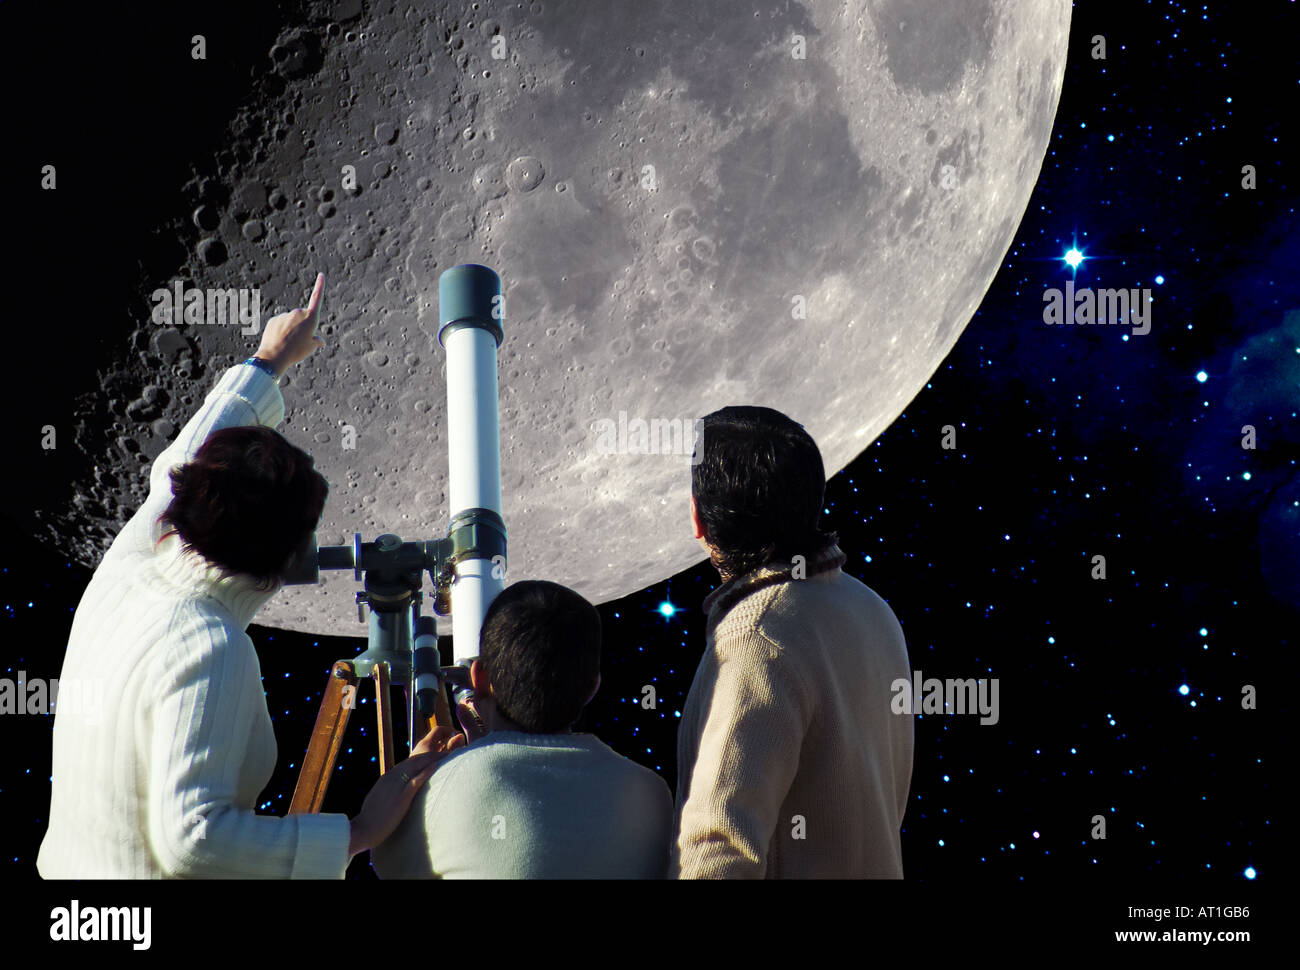 Family watching the moon with telescope Stock Photo